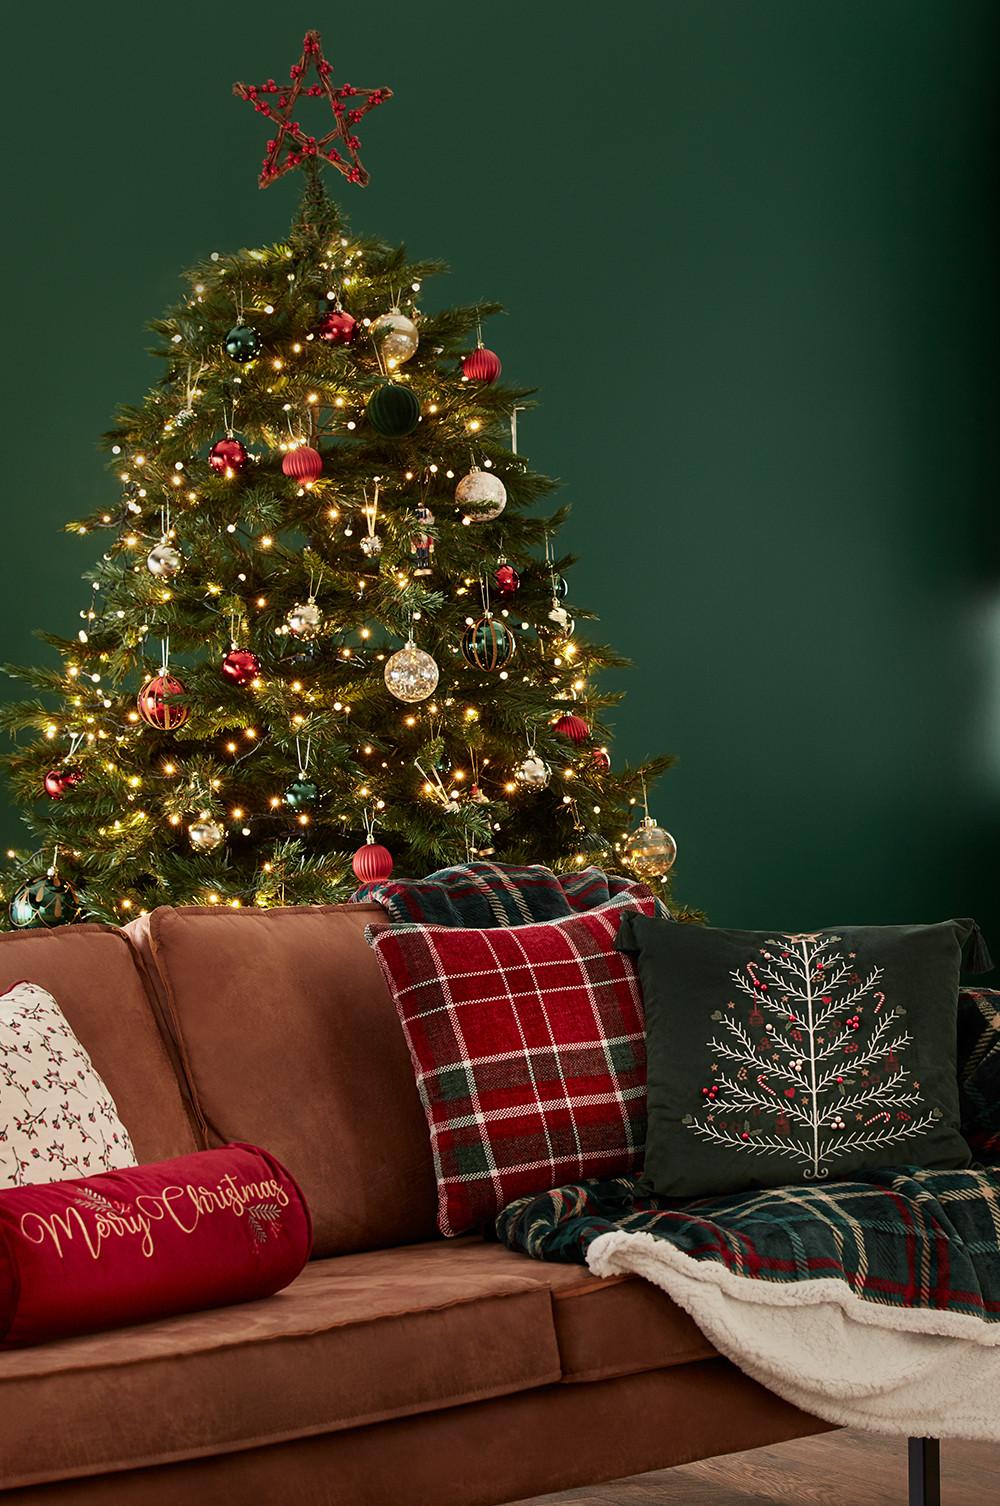 Christmas living room with festive pillows and tartan throws